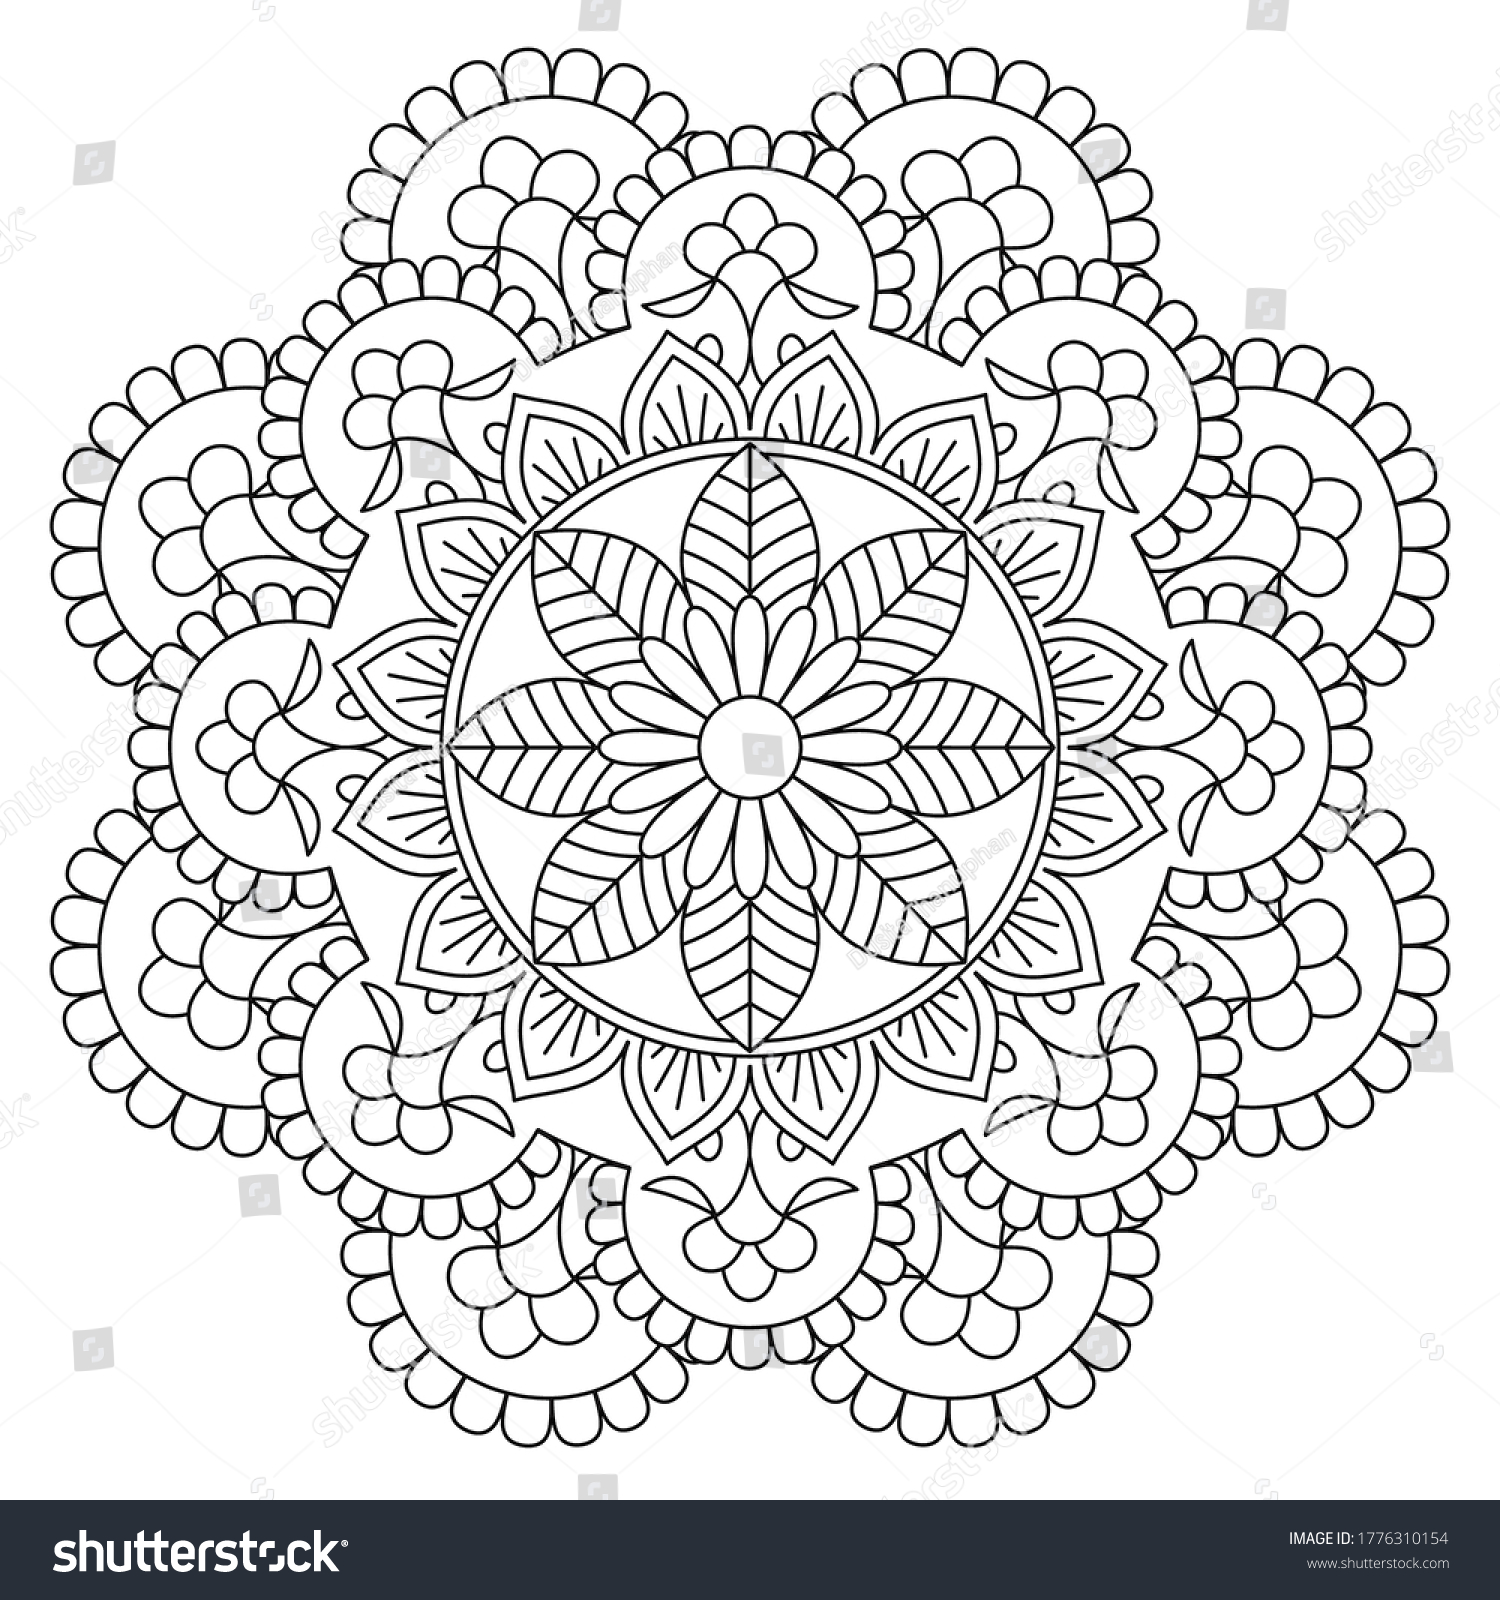 Easy Mandalas Adult Coloring Book Pages Stock Vector (Royalty Free ...